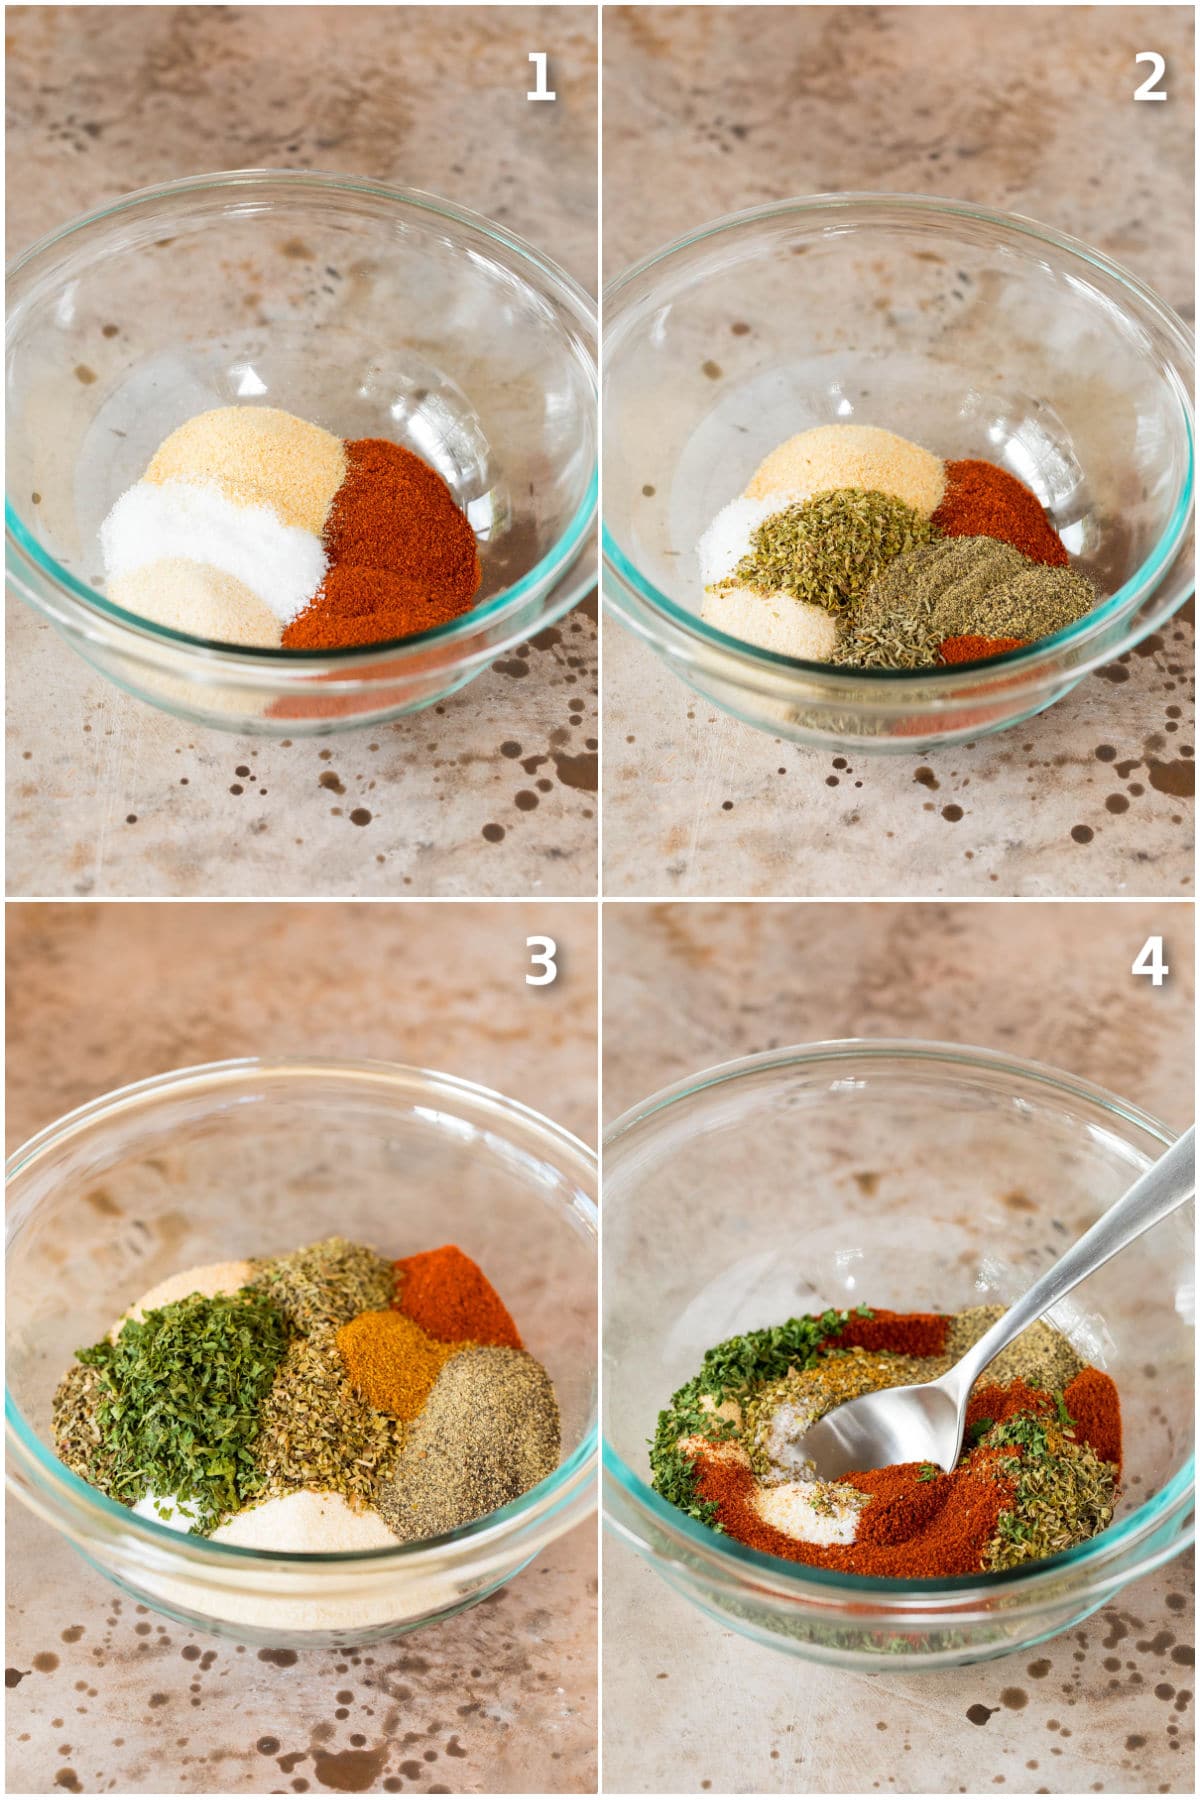 Step by step images on how to make seasoning mix.